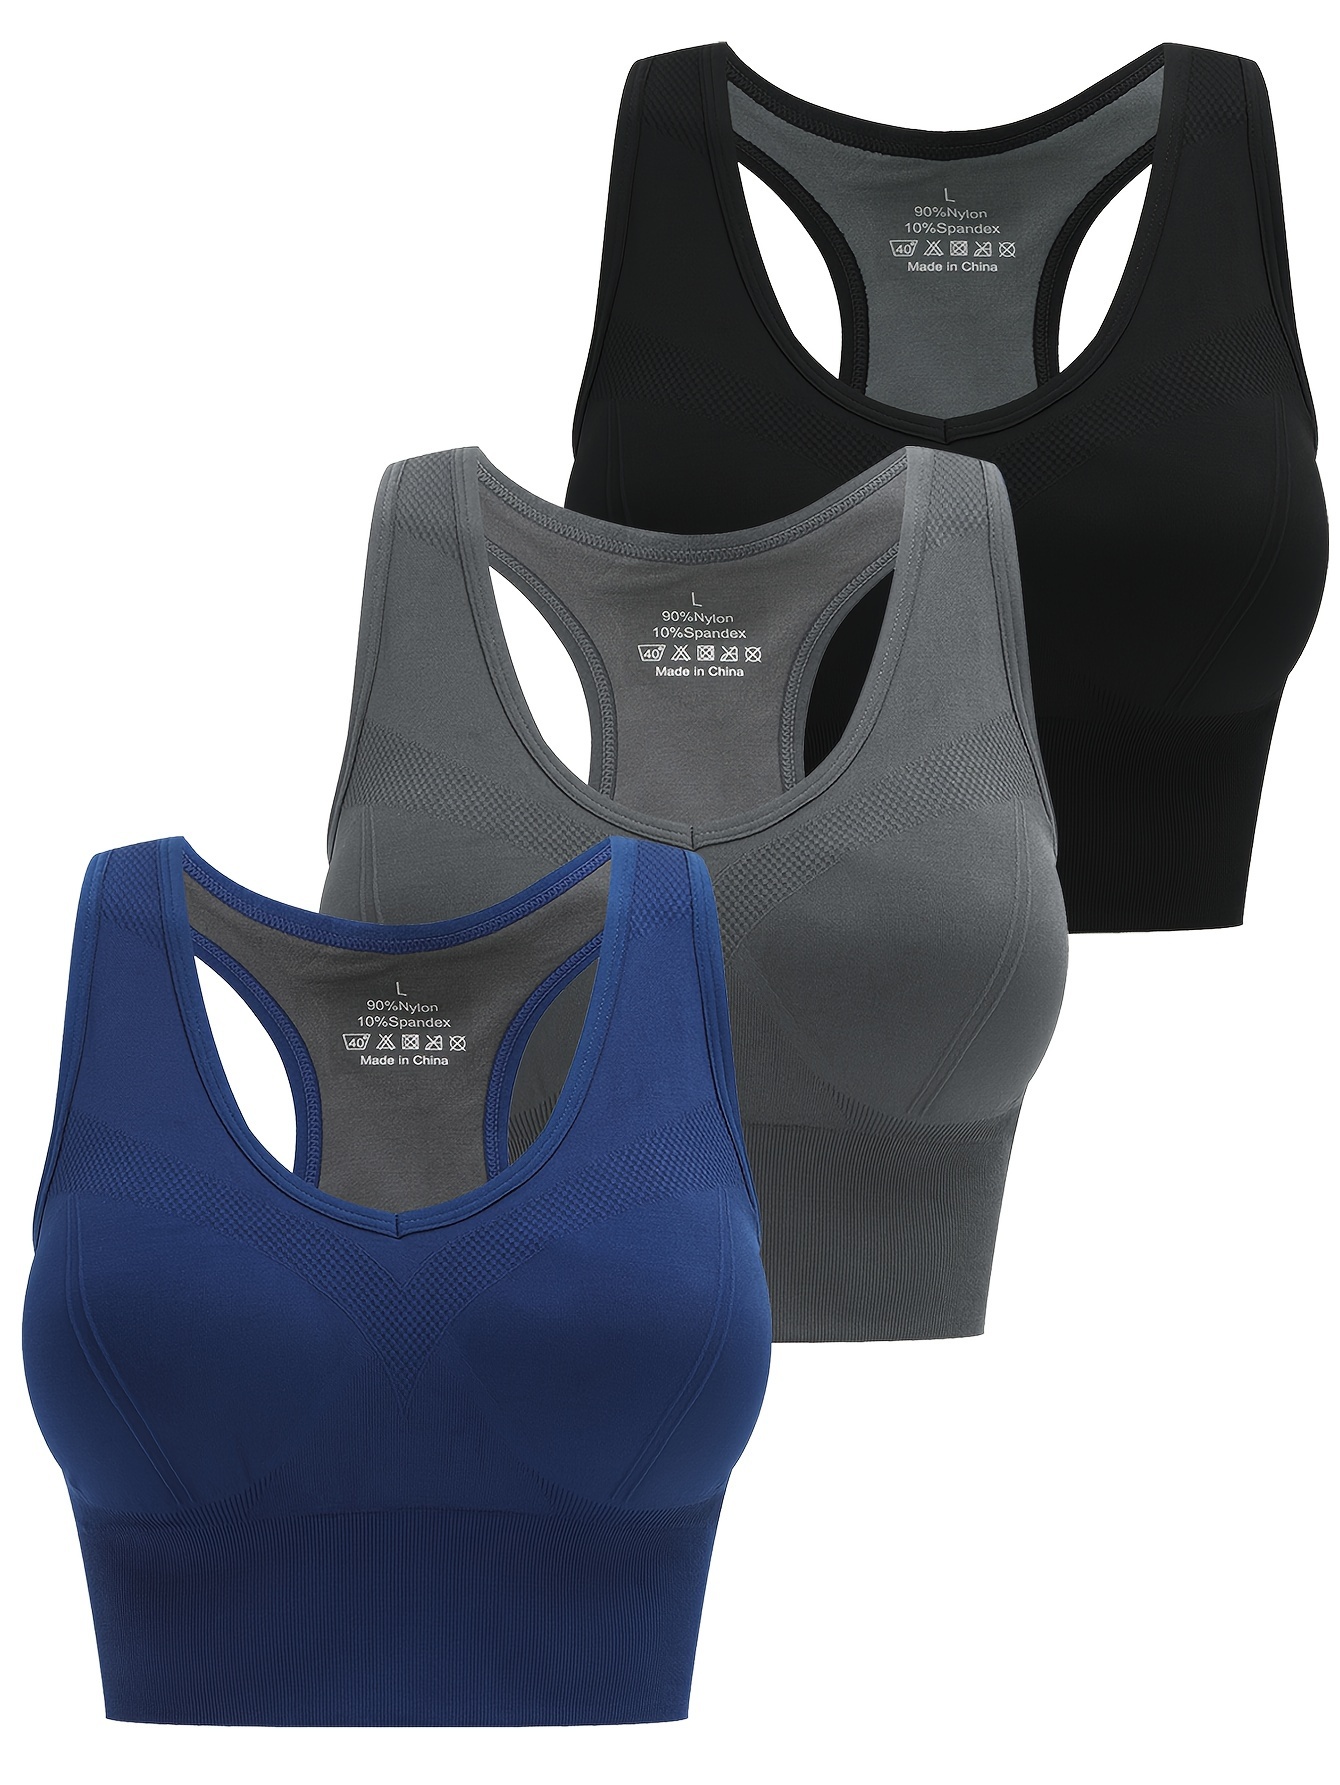 Women High Impact Sports Bras Running Bra Seamless Wirefree Molded Cups  Workout Top Vest Activewear 